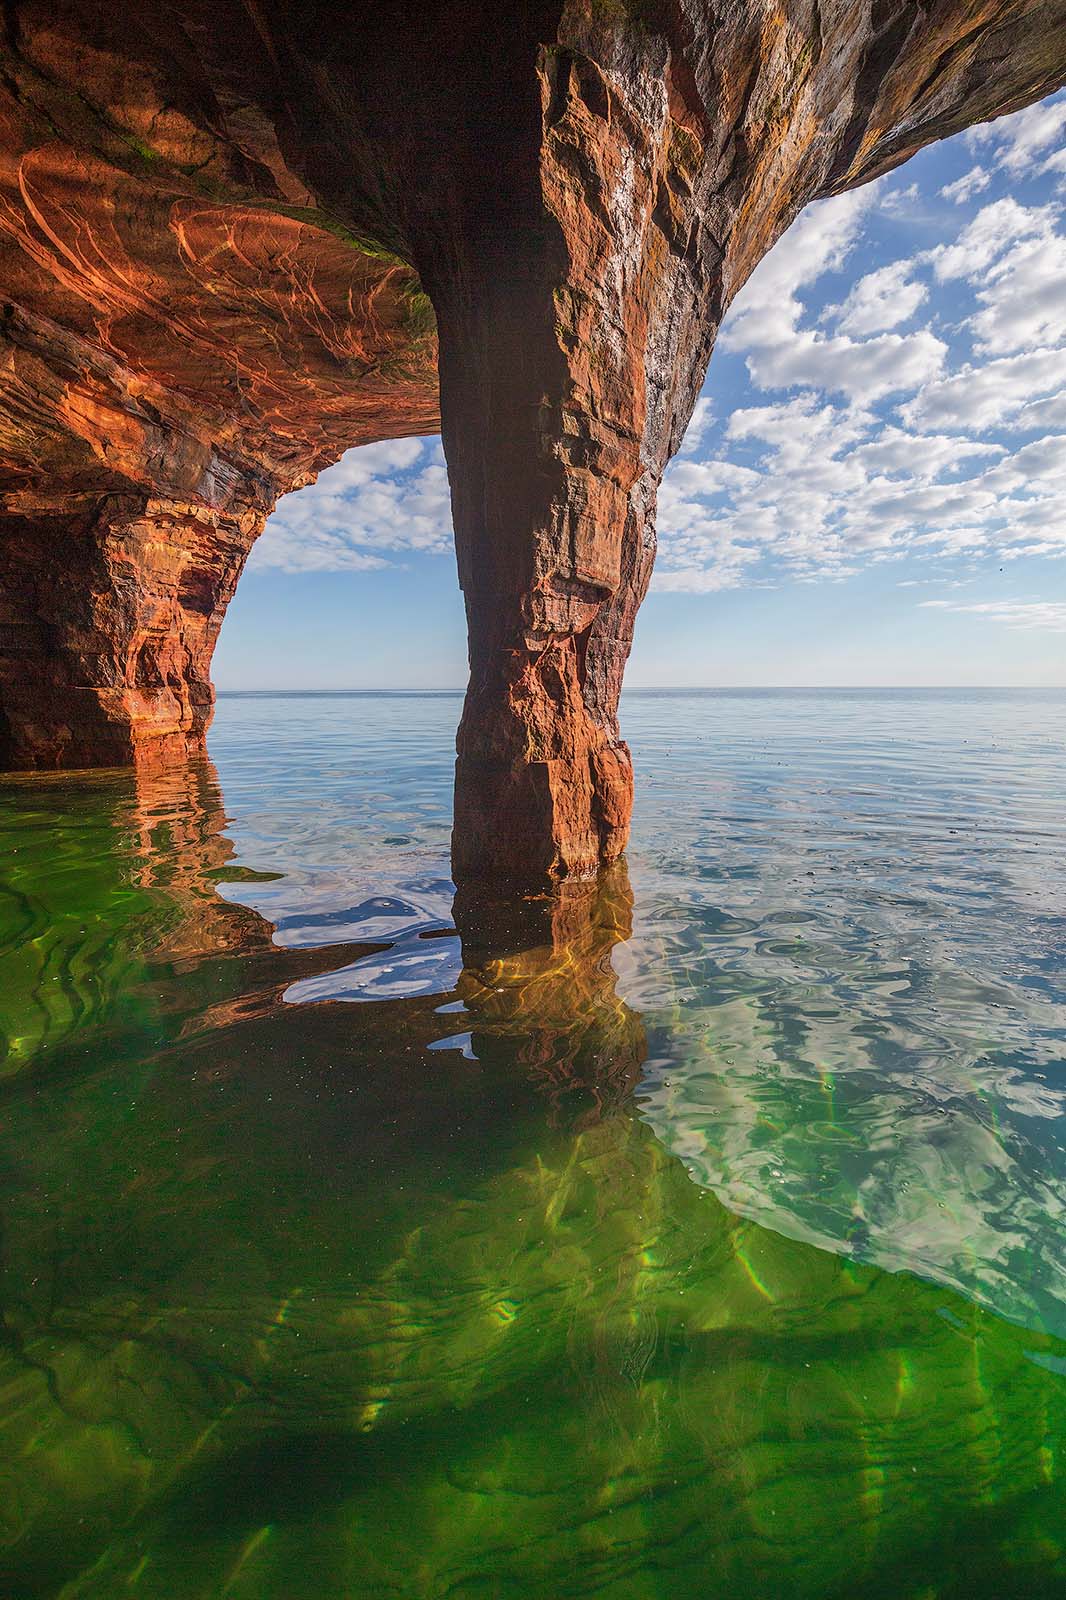 sea cave on devil's island in the apostle islands national lakeshore on lake superior wisconsin